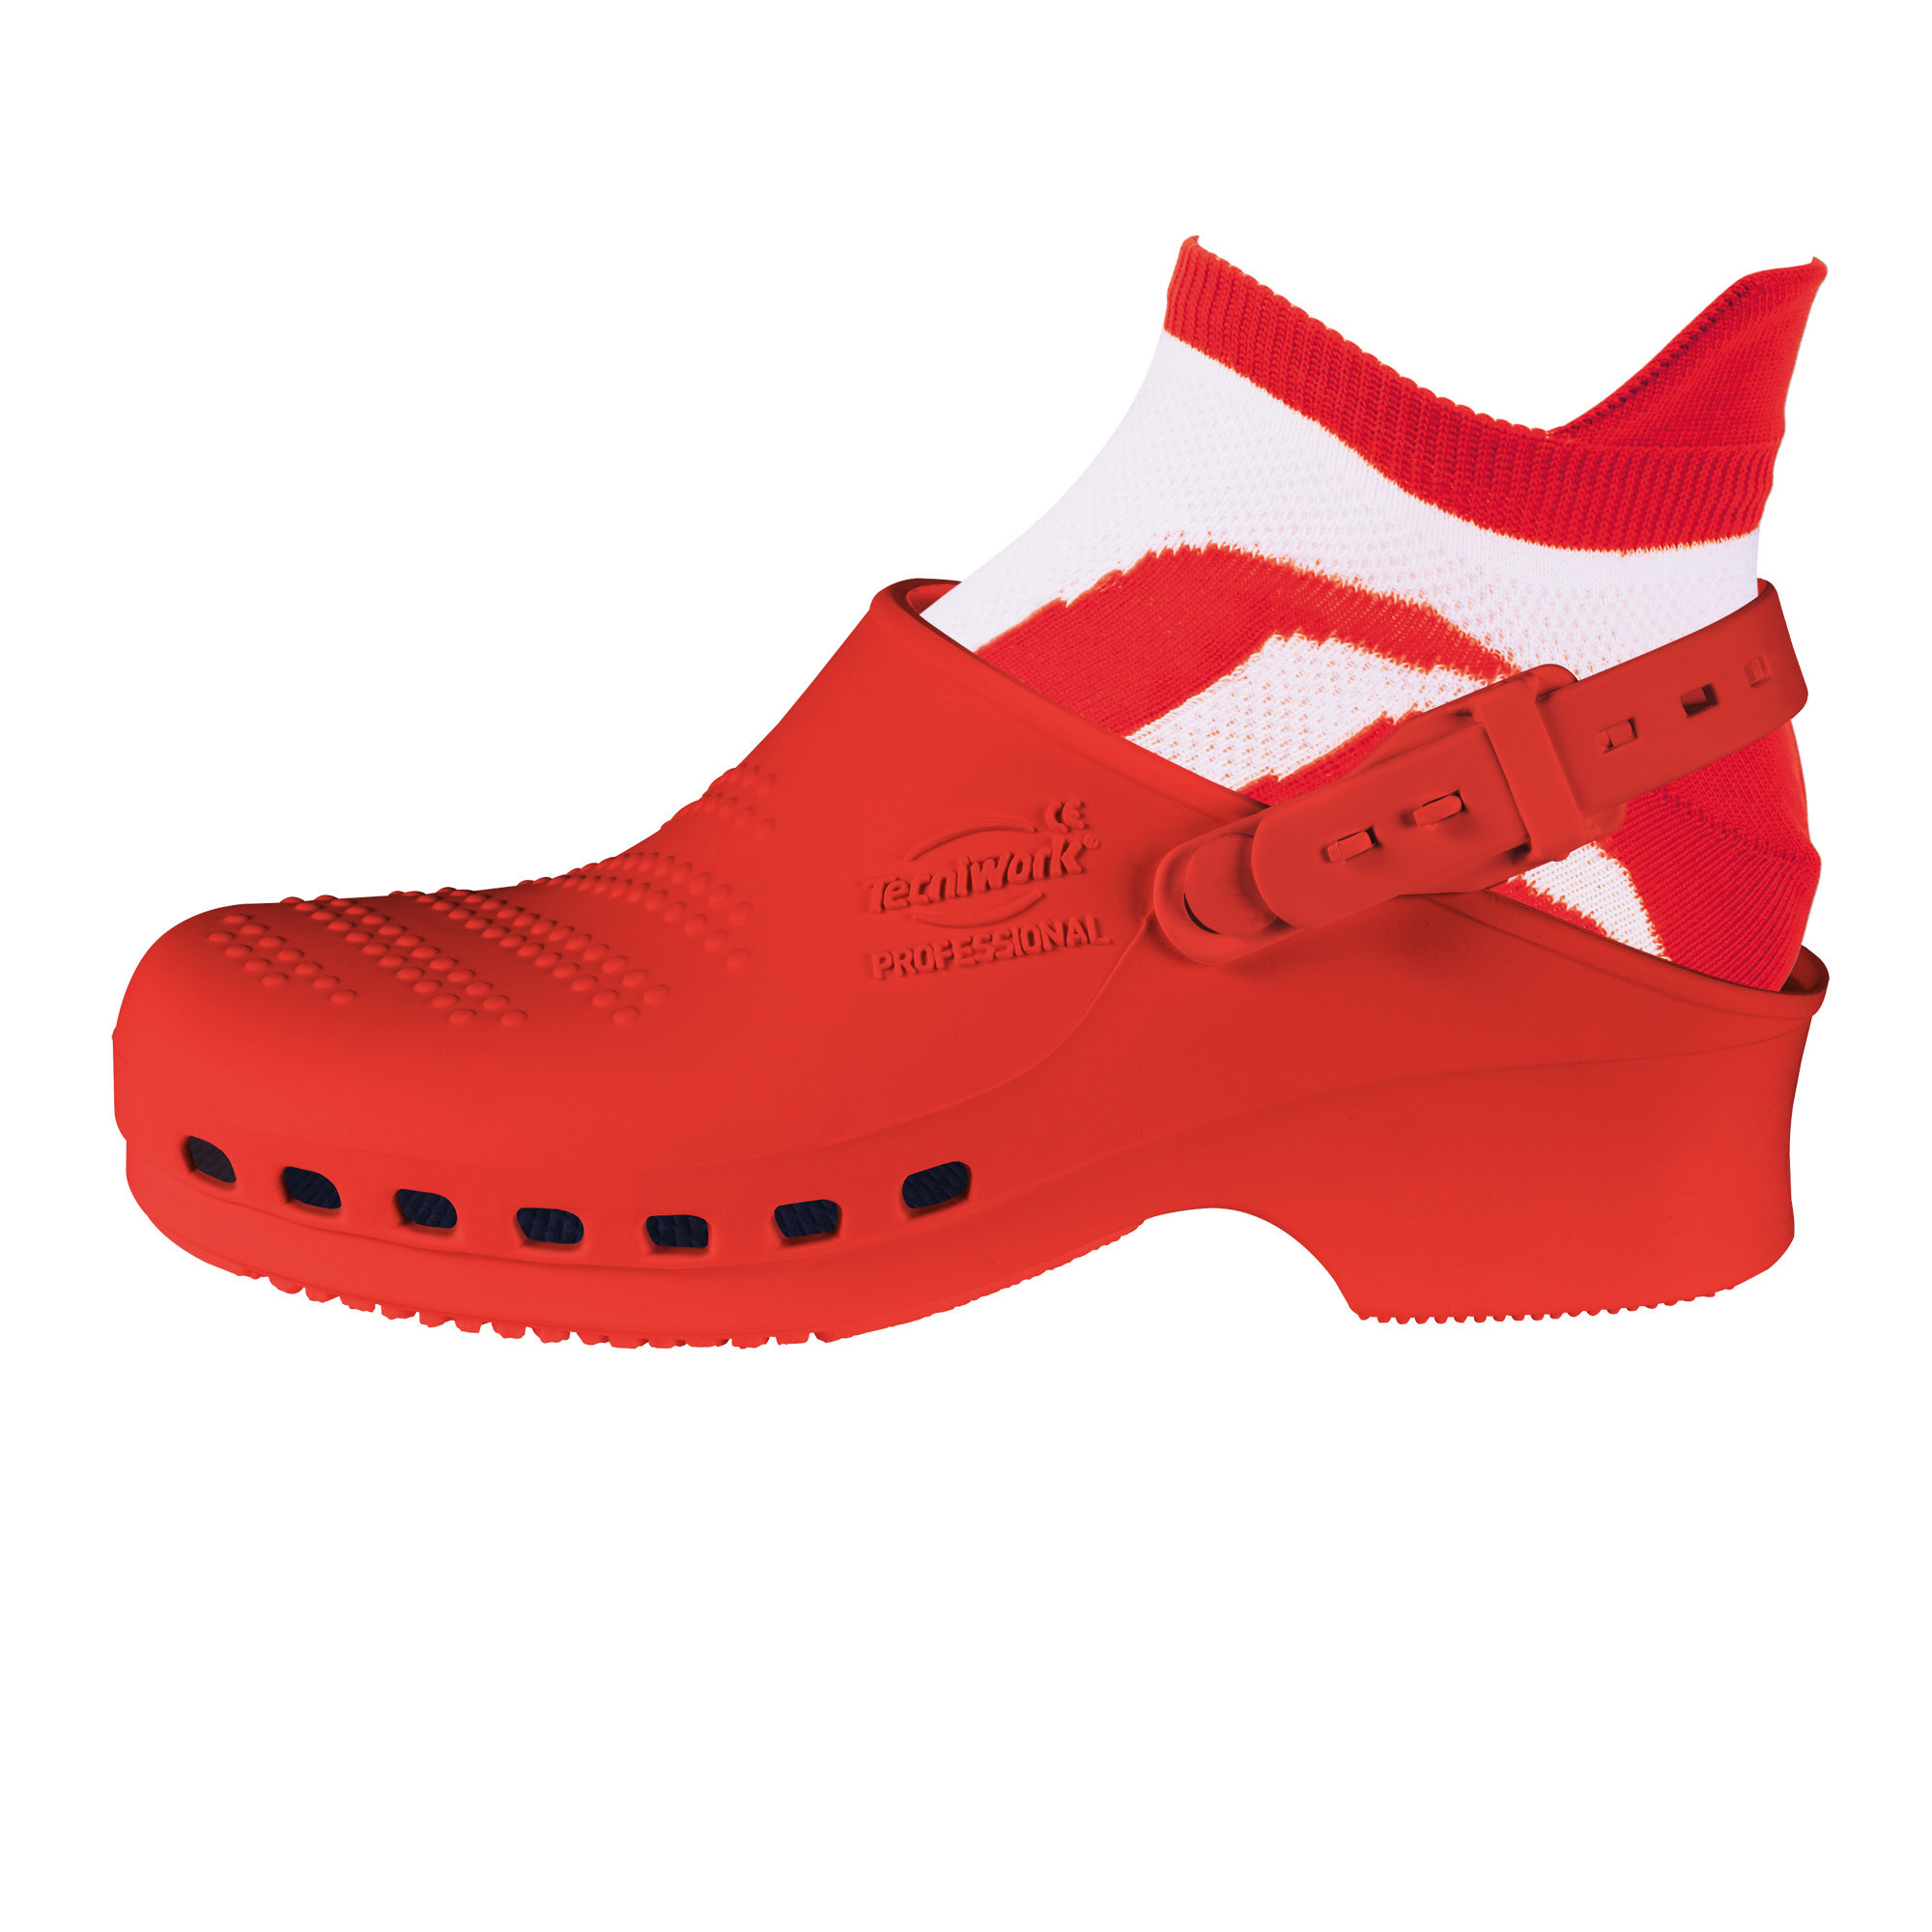 Professional sanitary clogs red Size 38/39